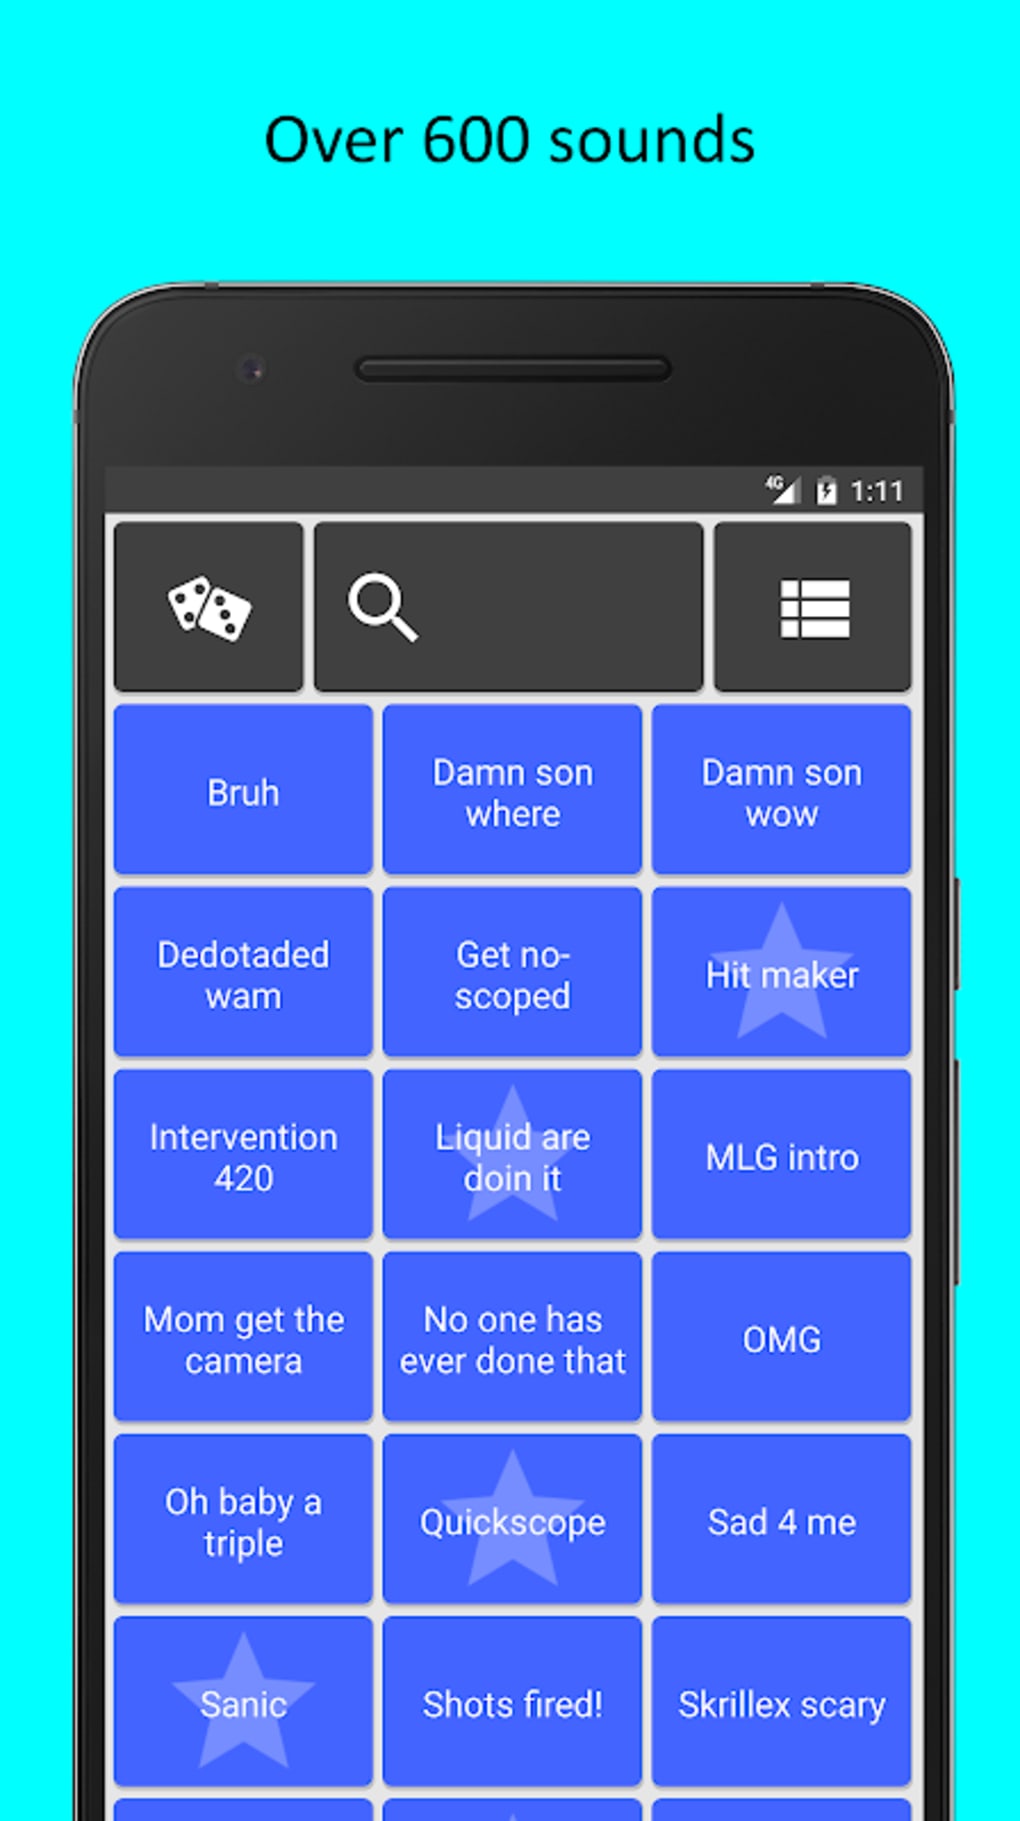 Lol Meme Sound Button APK for Android Download